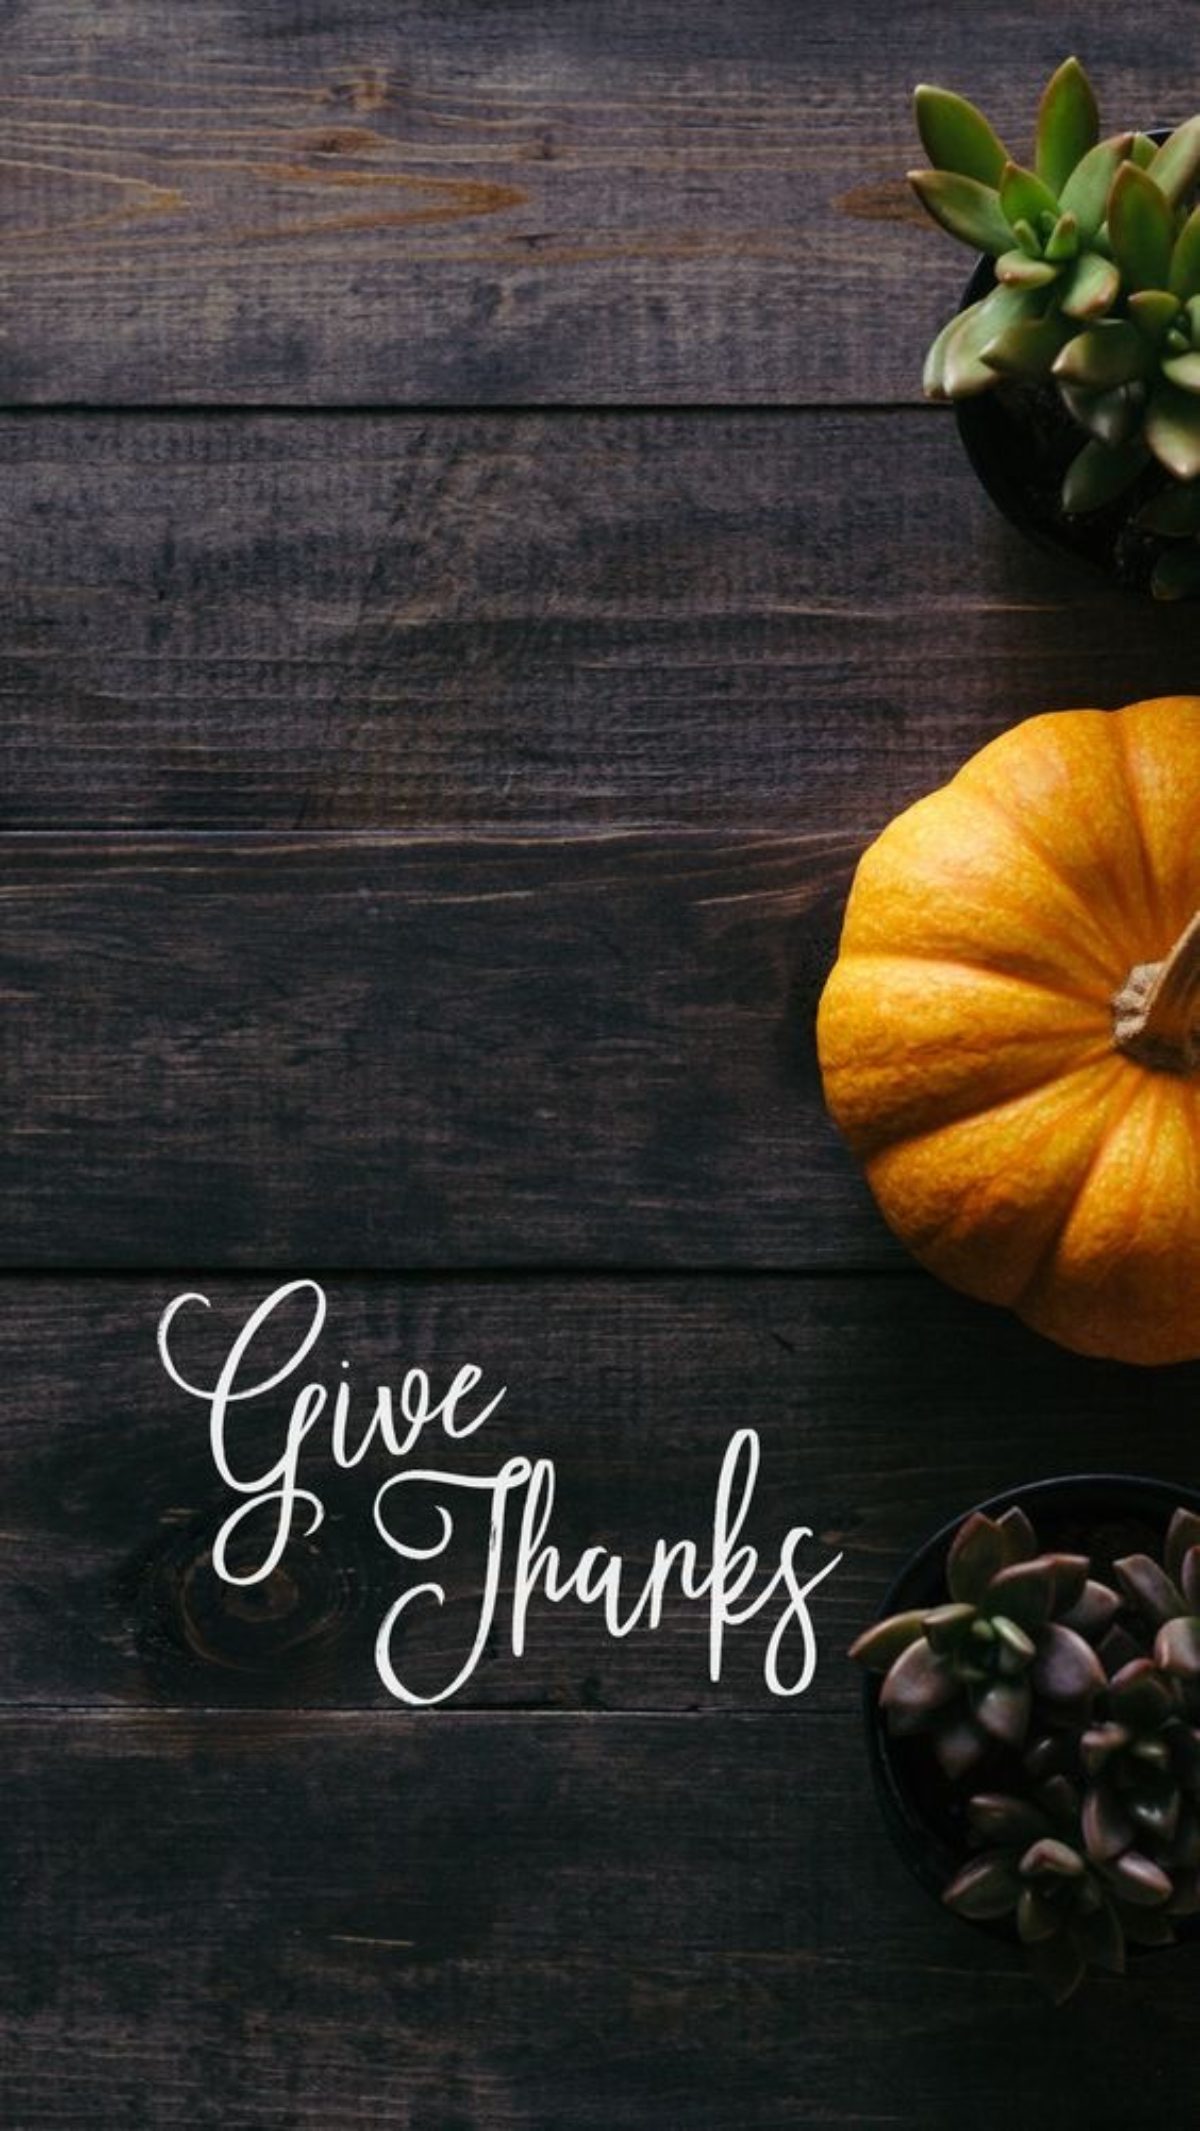 Cute Thanksgiving Wallpaper For iPhone. (Free HD Download)